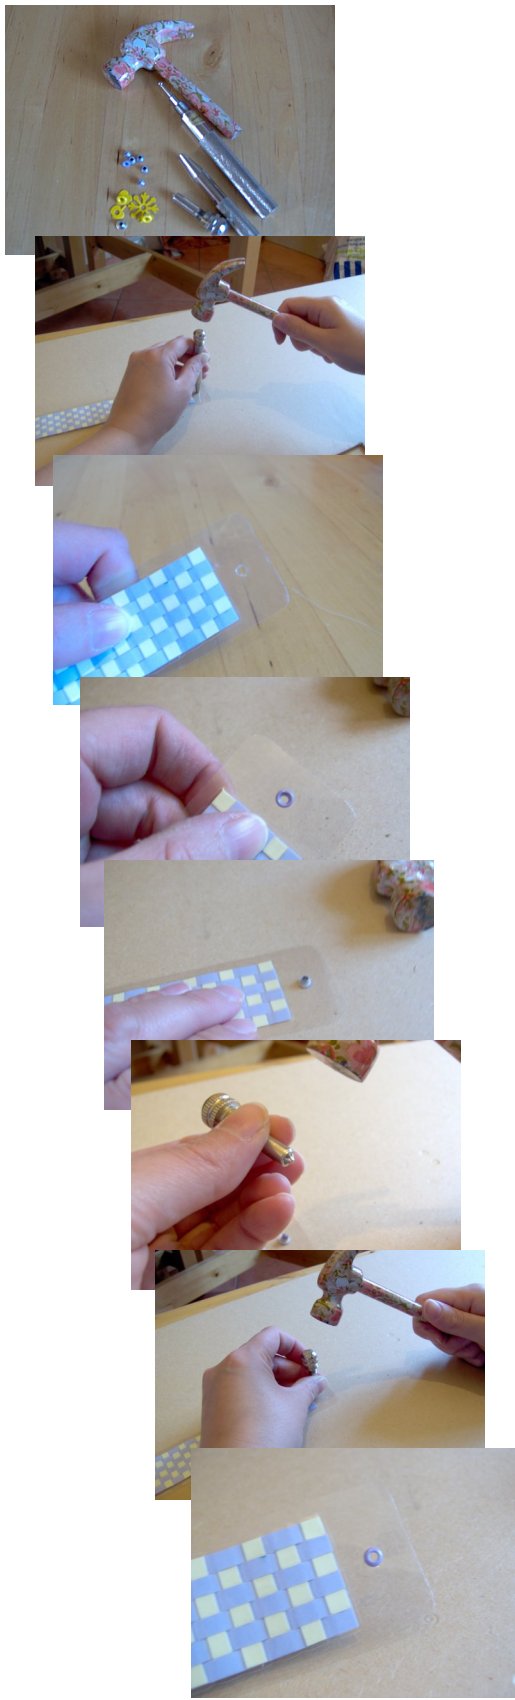 Things to make and do - Paper weaving bookmark